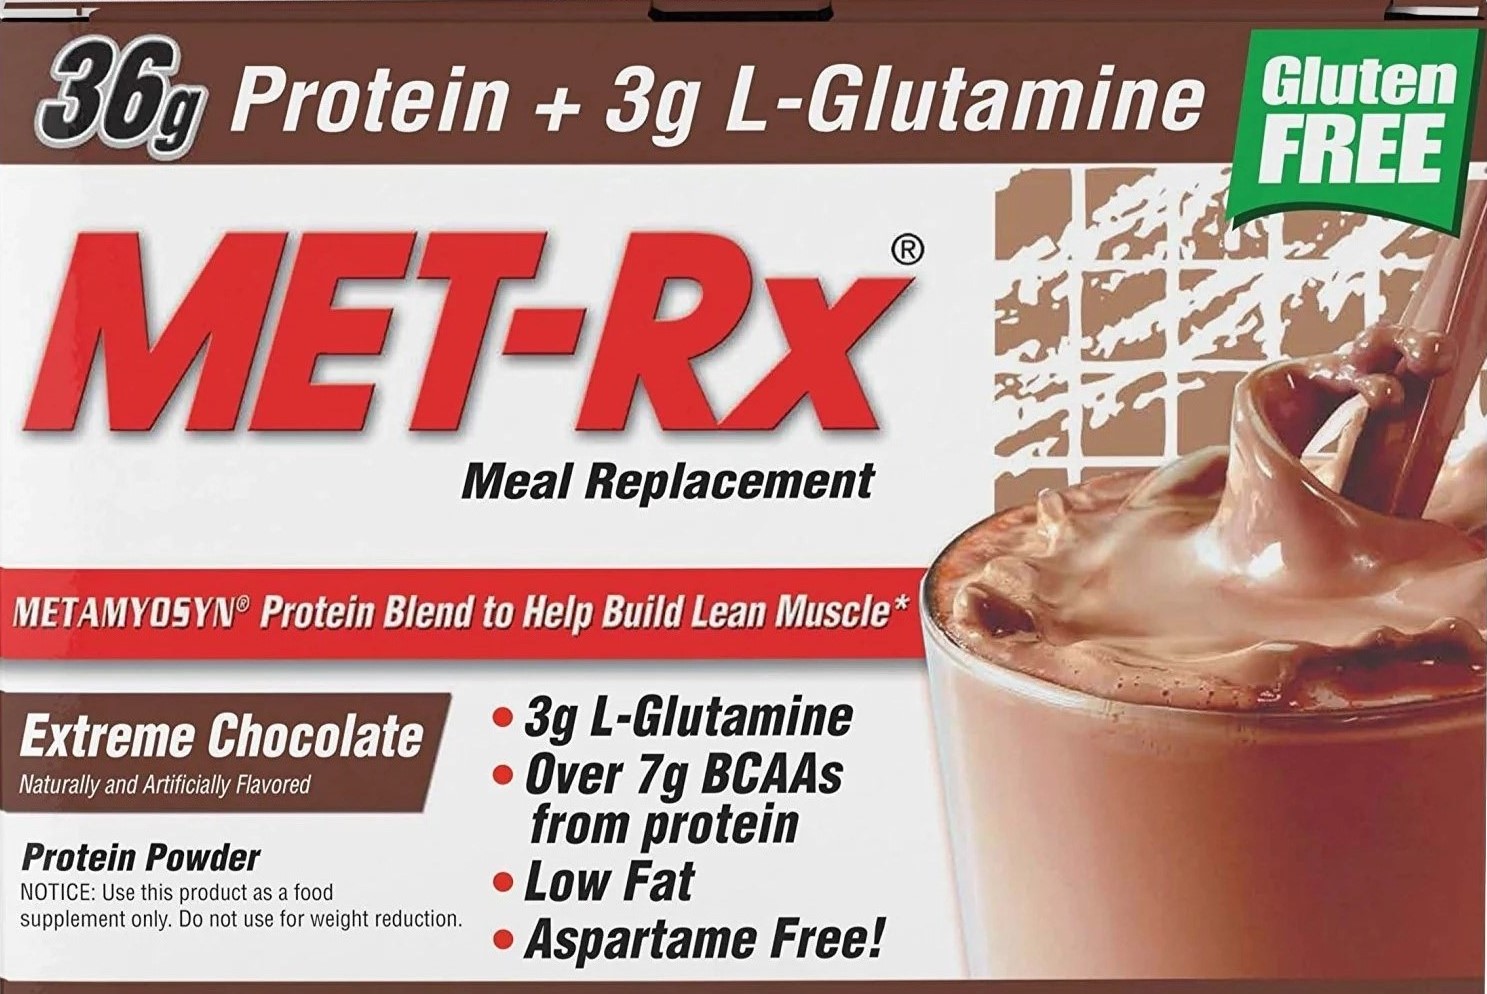 18-met-rx-meal-replacement-nutrition-facts